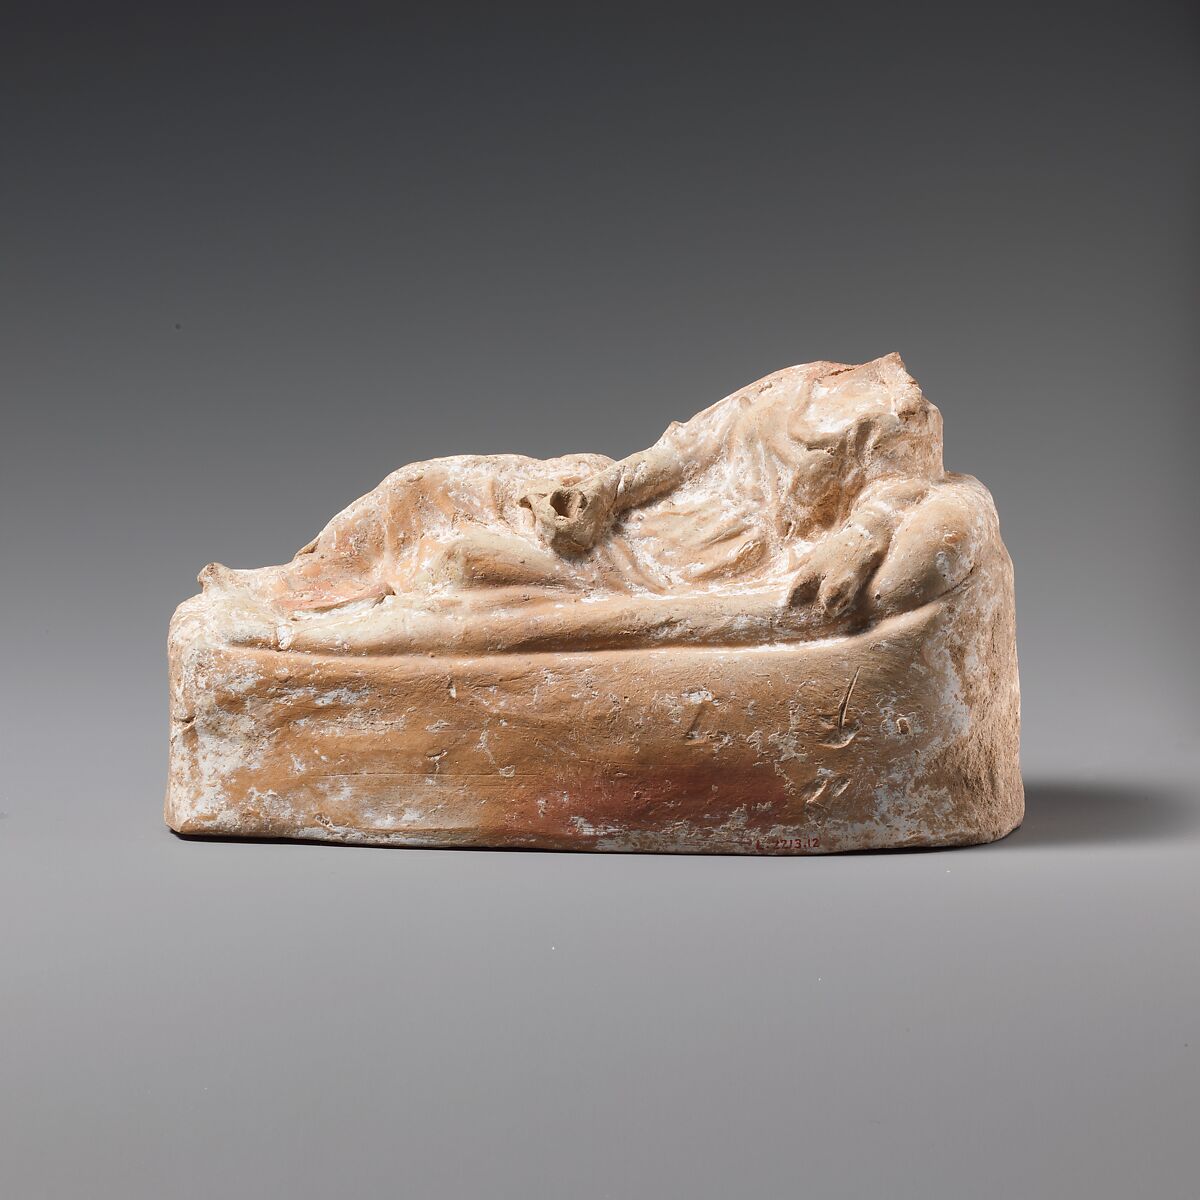 Terracotta statuette of a woman reclining on a couch, Terracotta, East Greek 